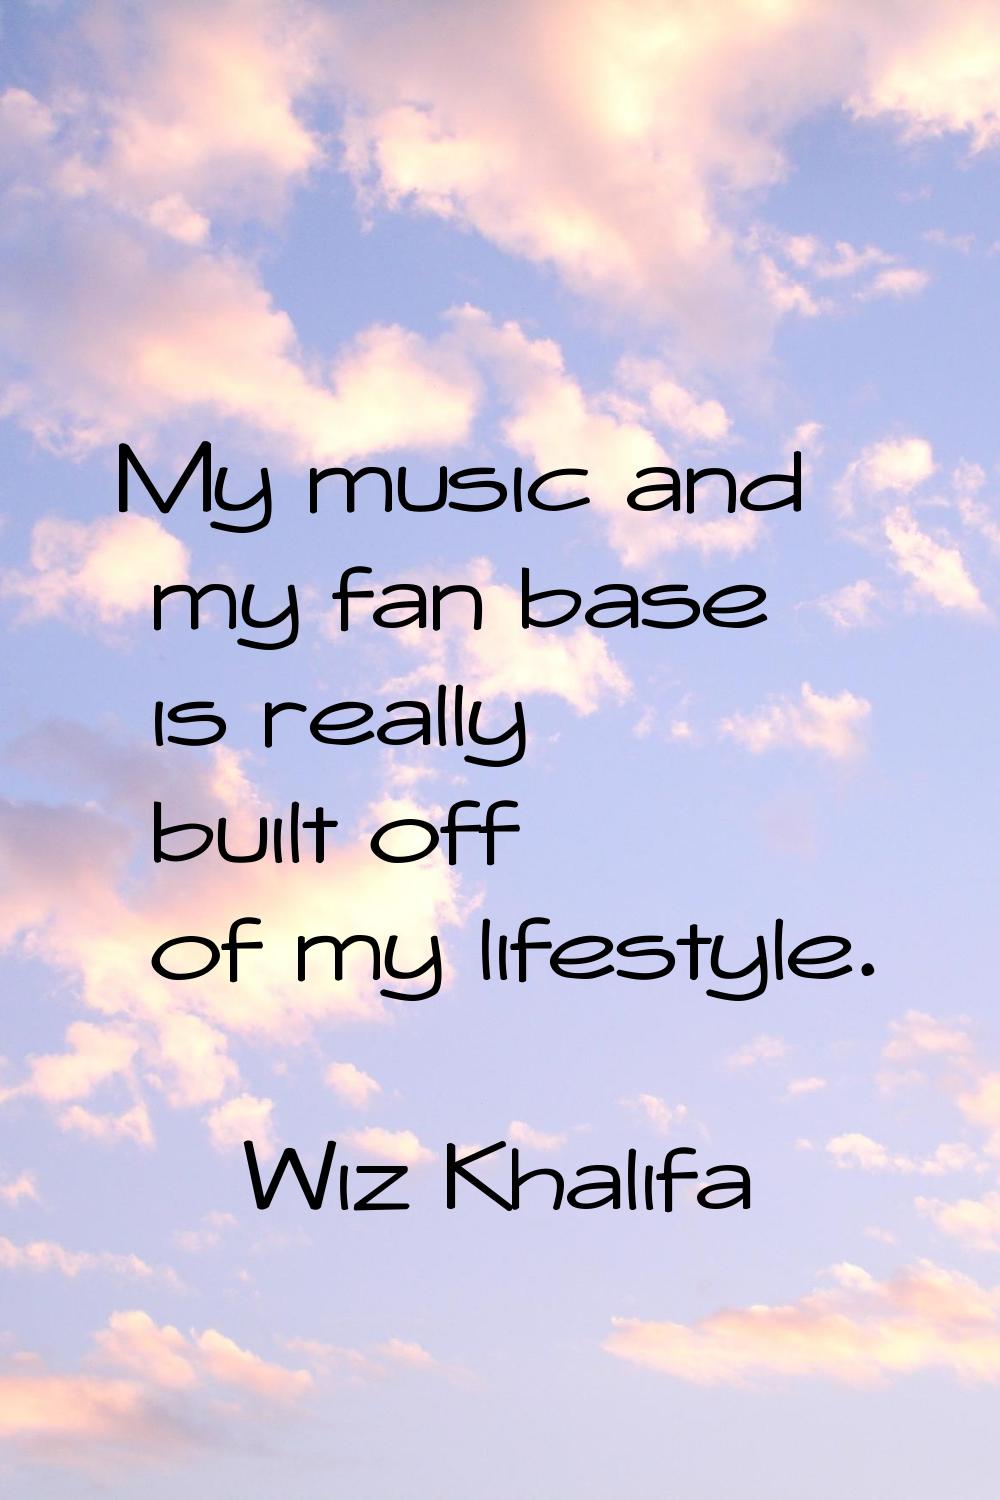 My music and my fan base is really built off of my lifestyle.